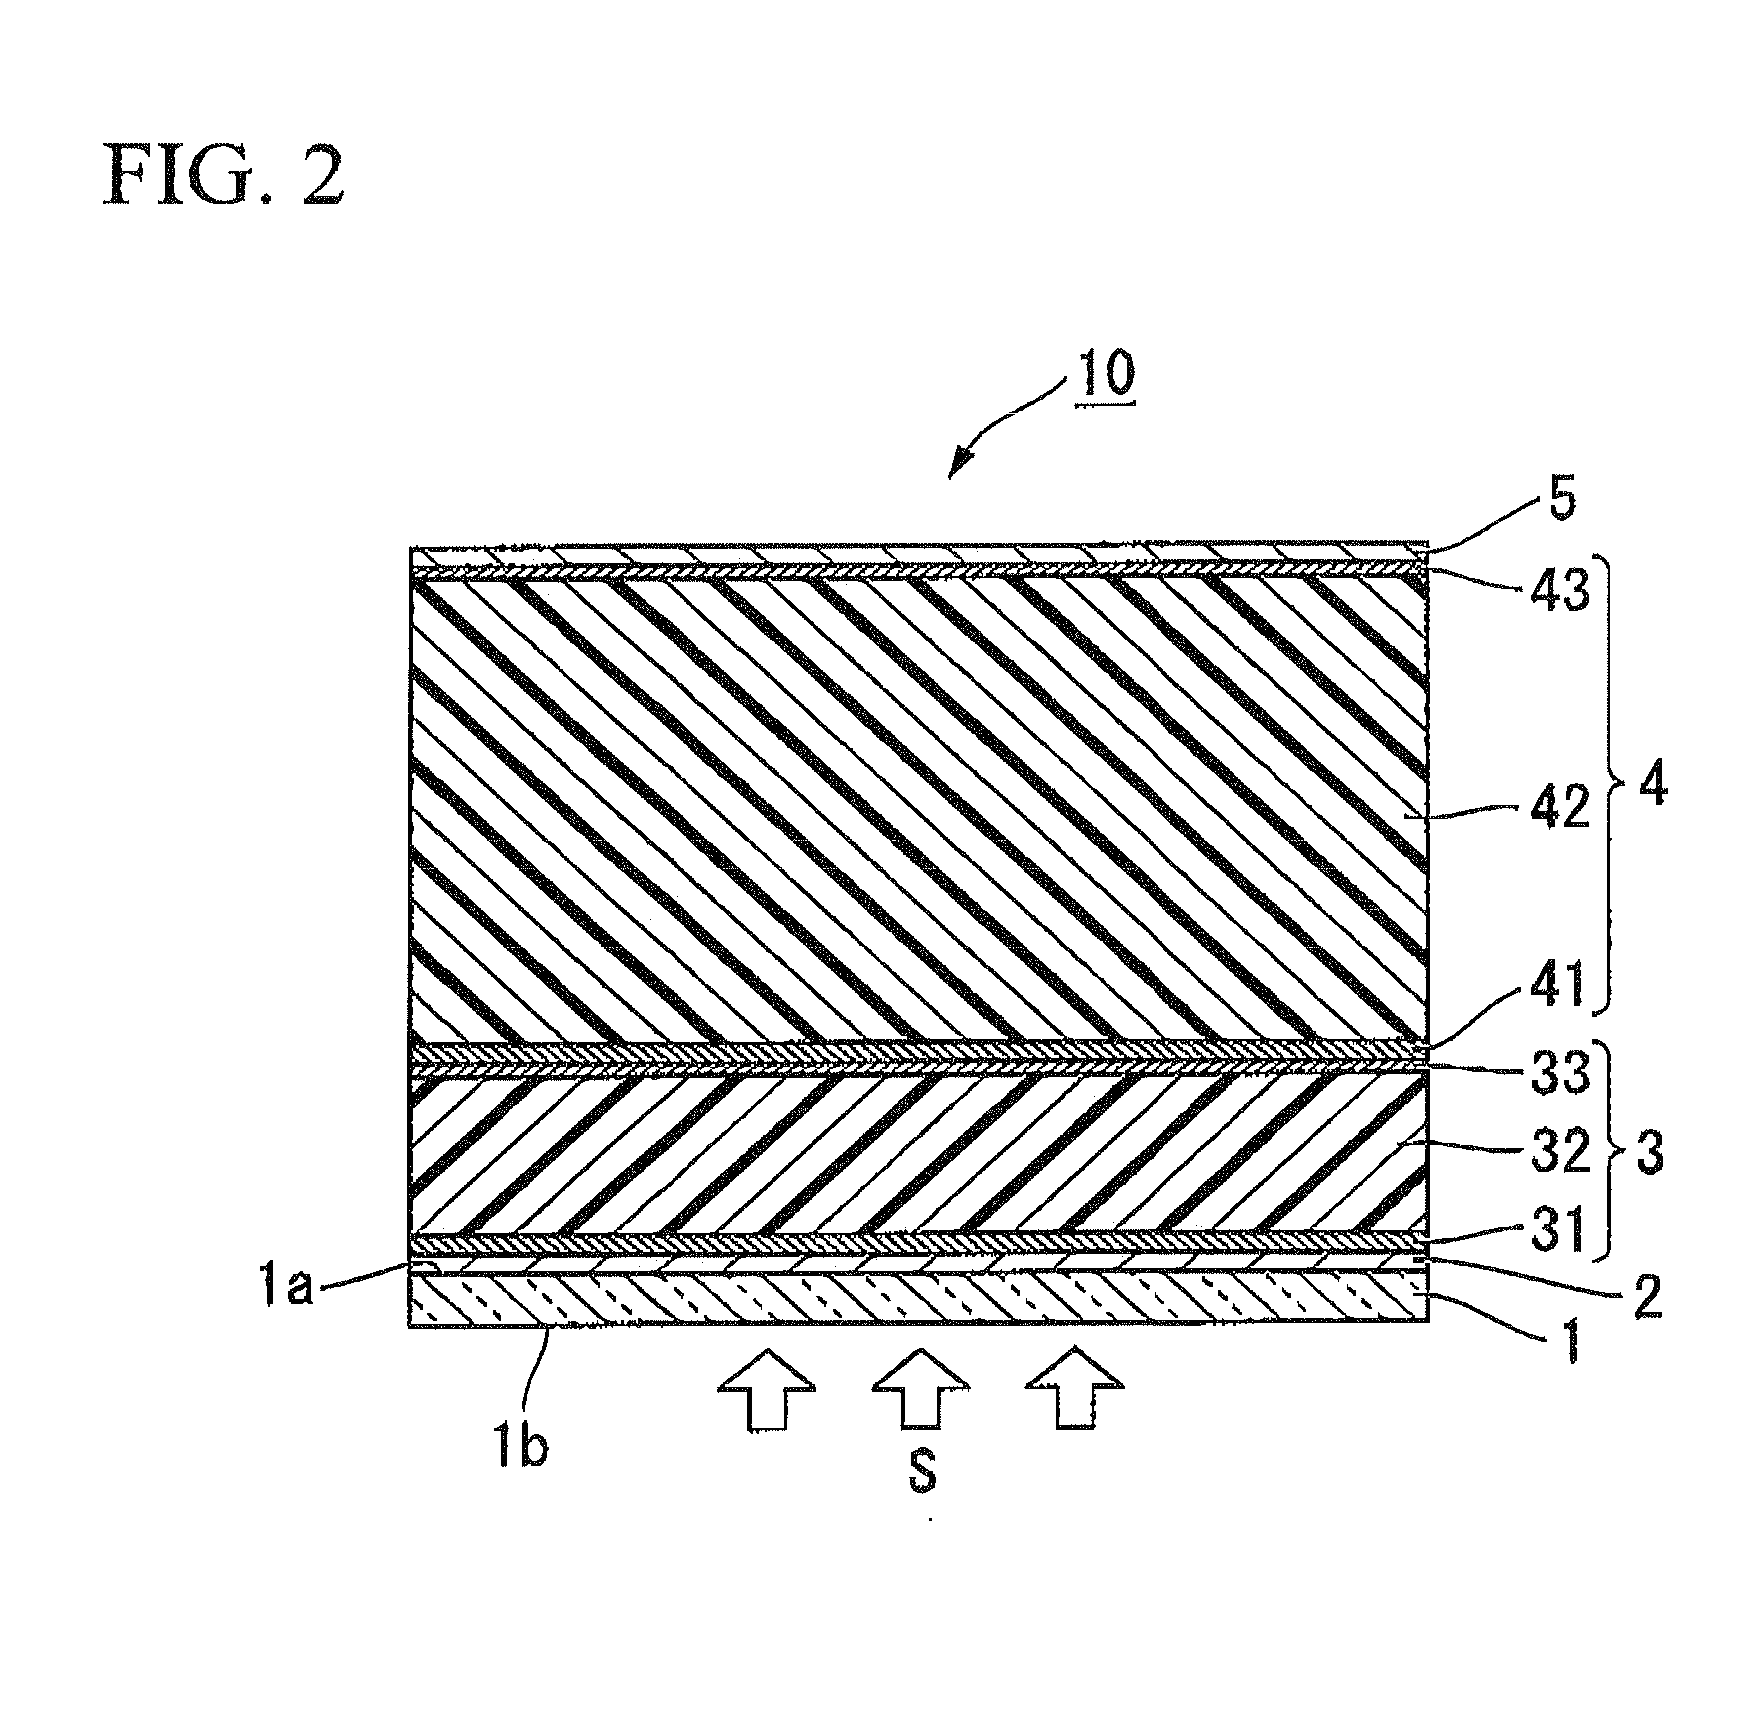 Photoelectric conversion device manufacturing method, photoelectric conversion device, and photoelectric conversion device manufacturing system